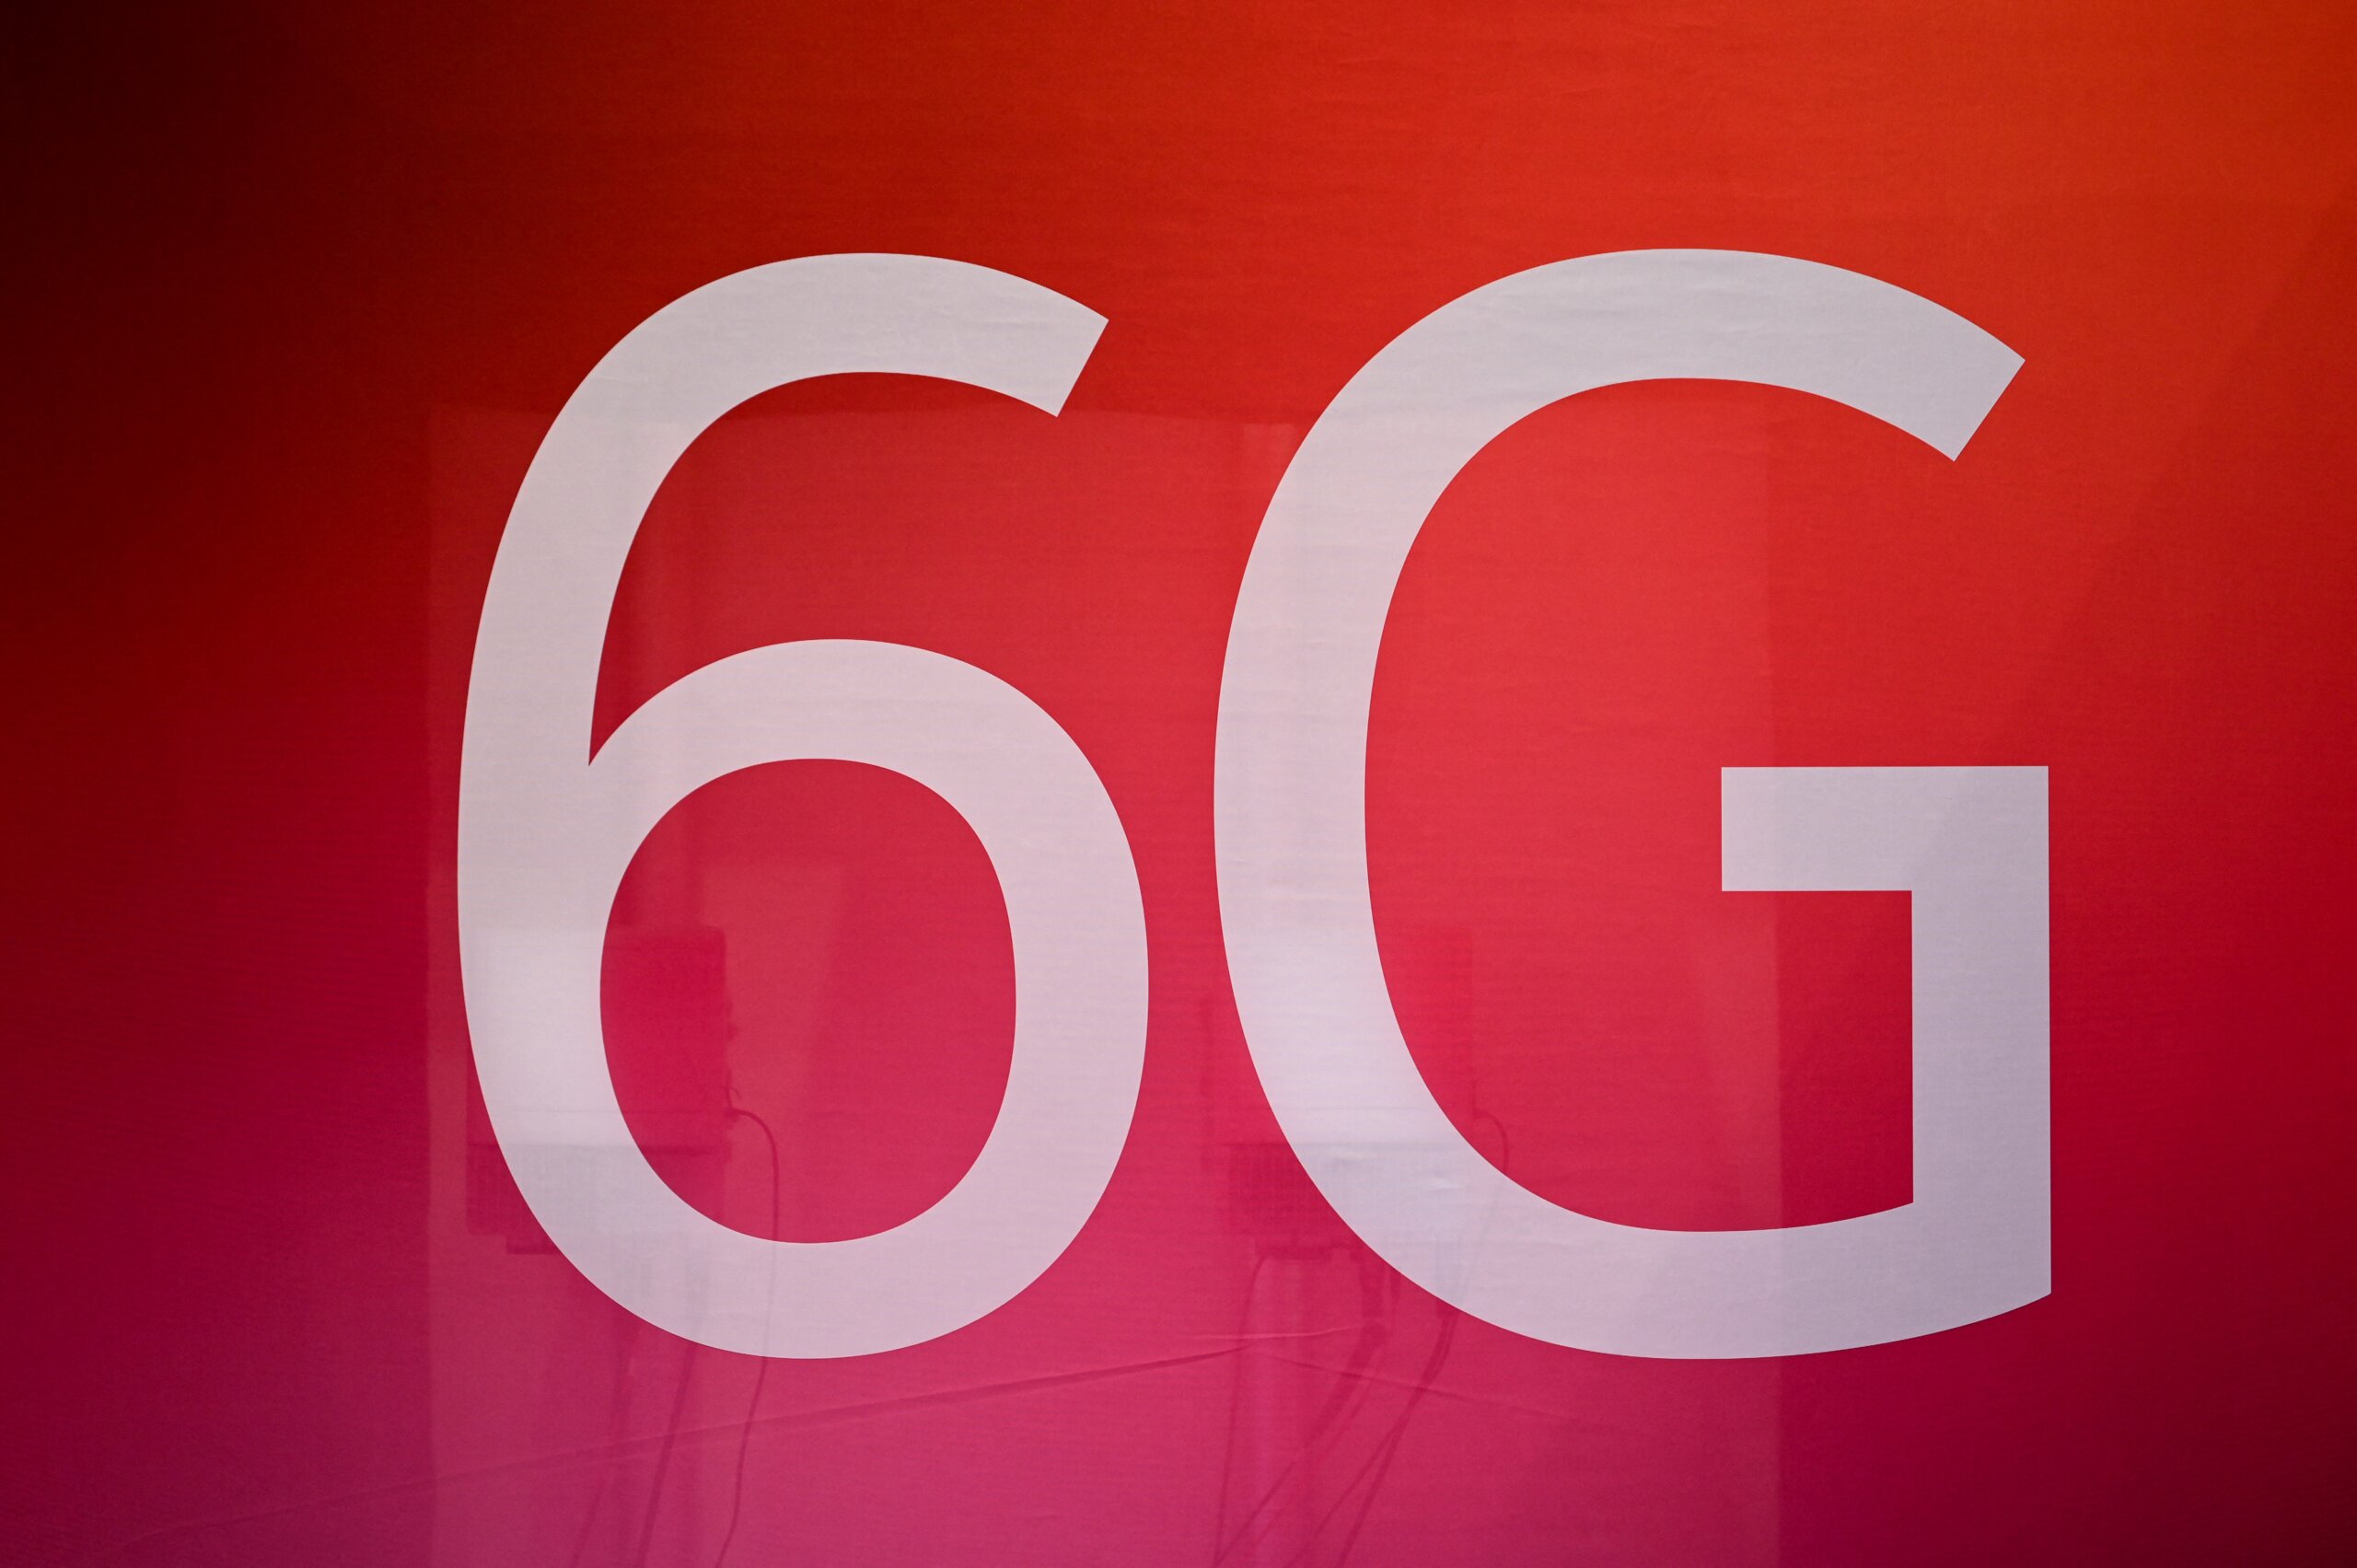 India wants to be a leader in 6G by 2030